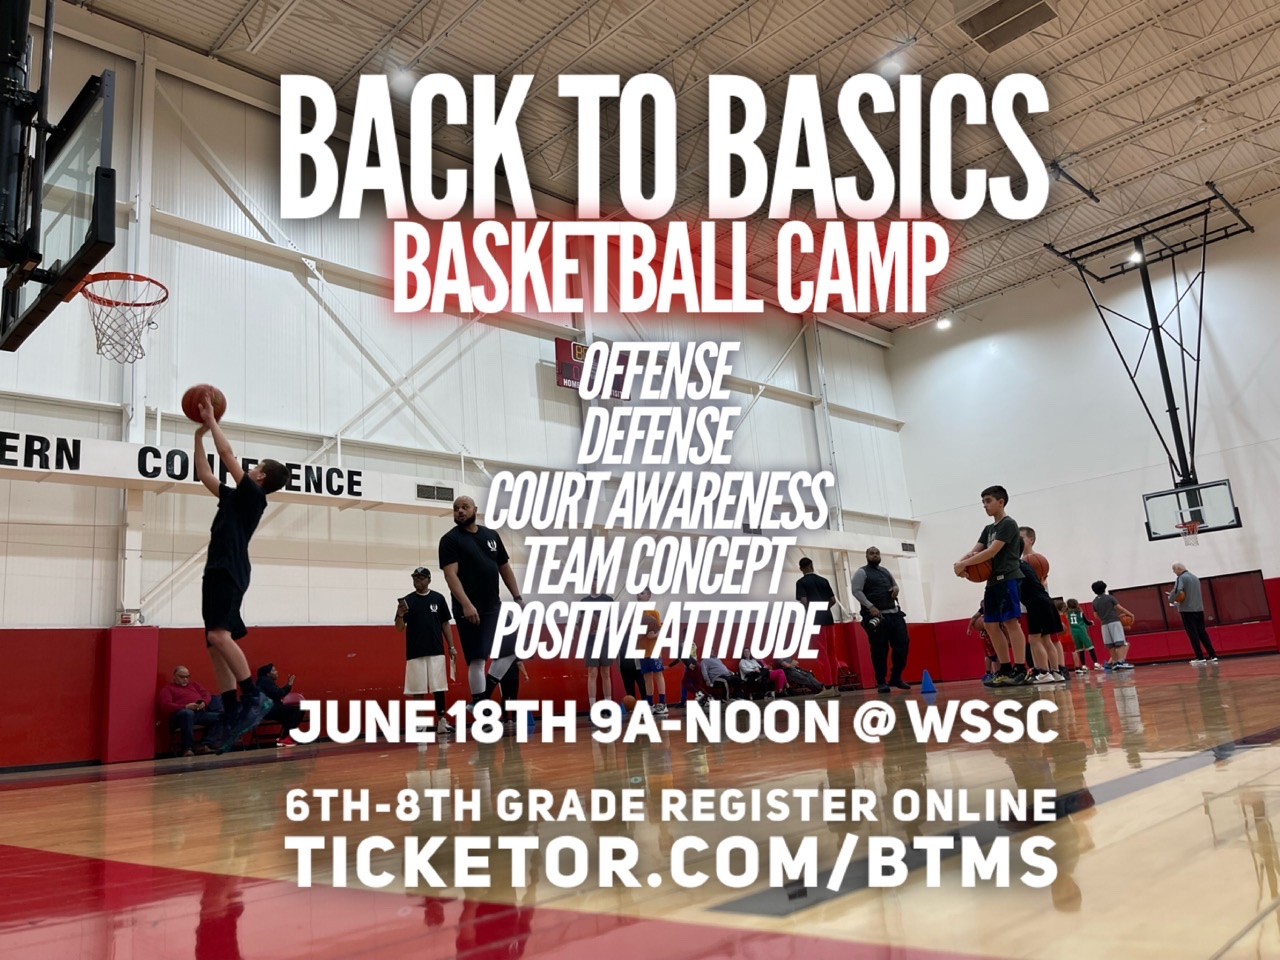 Back to Basics Basketball Camp 6th-8th grade  on Jun 18, 09:00@West Suburban Sports Complex - Buy tickets and Get information on BTMS LLC 